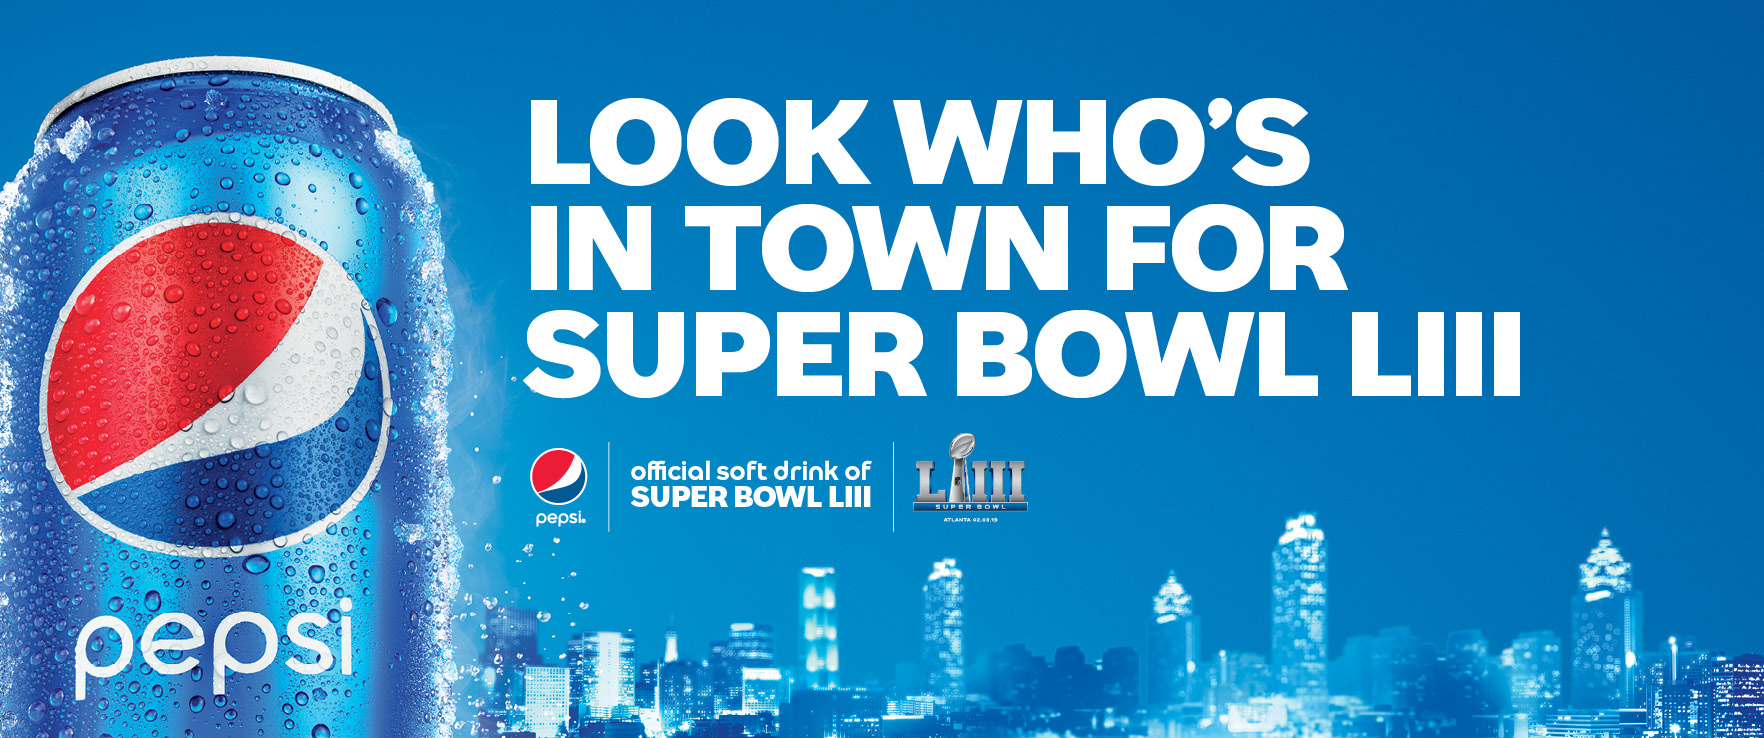 Pepsi is more than OK in new Super Bowl ad campaign - CDR ...